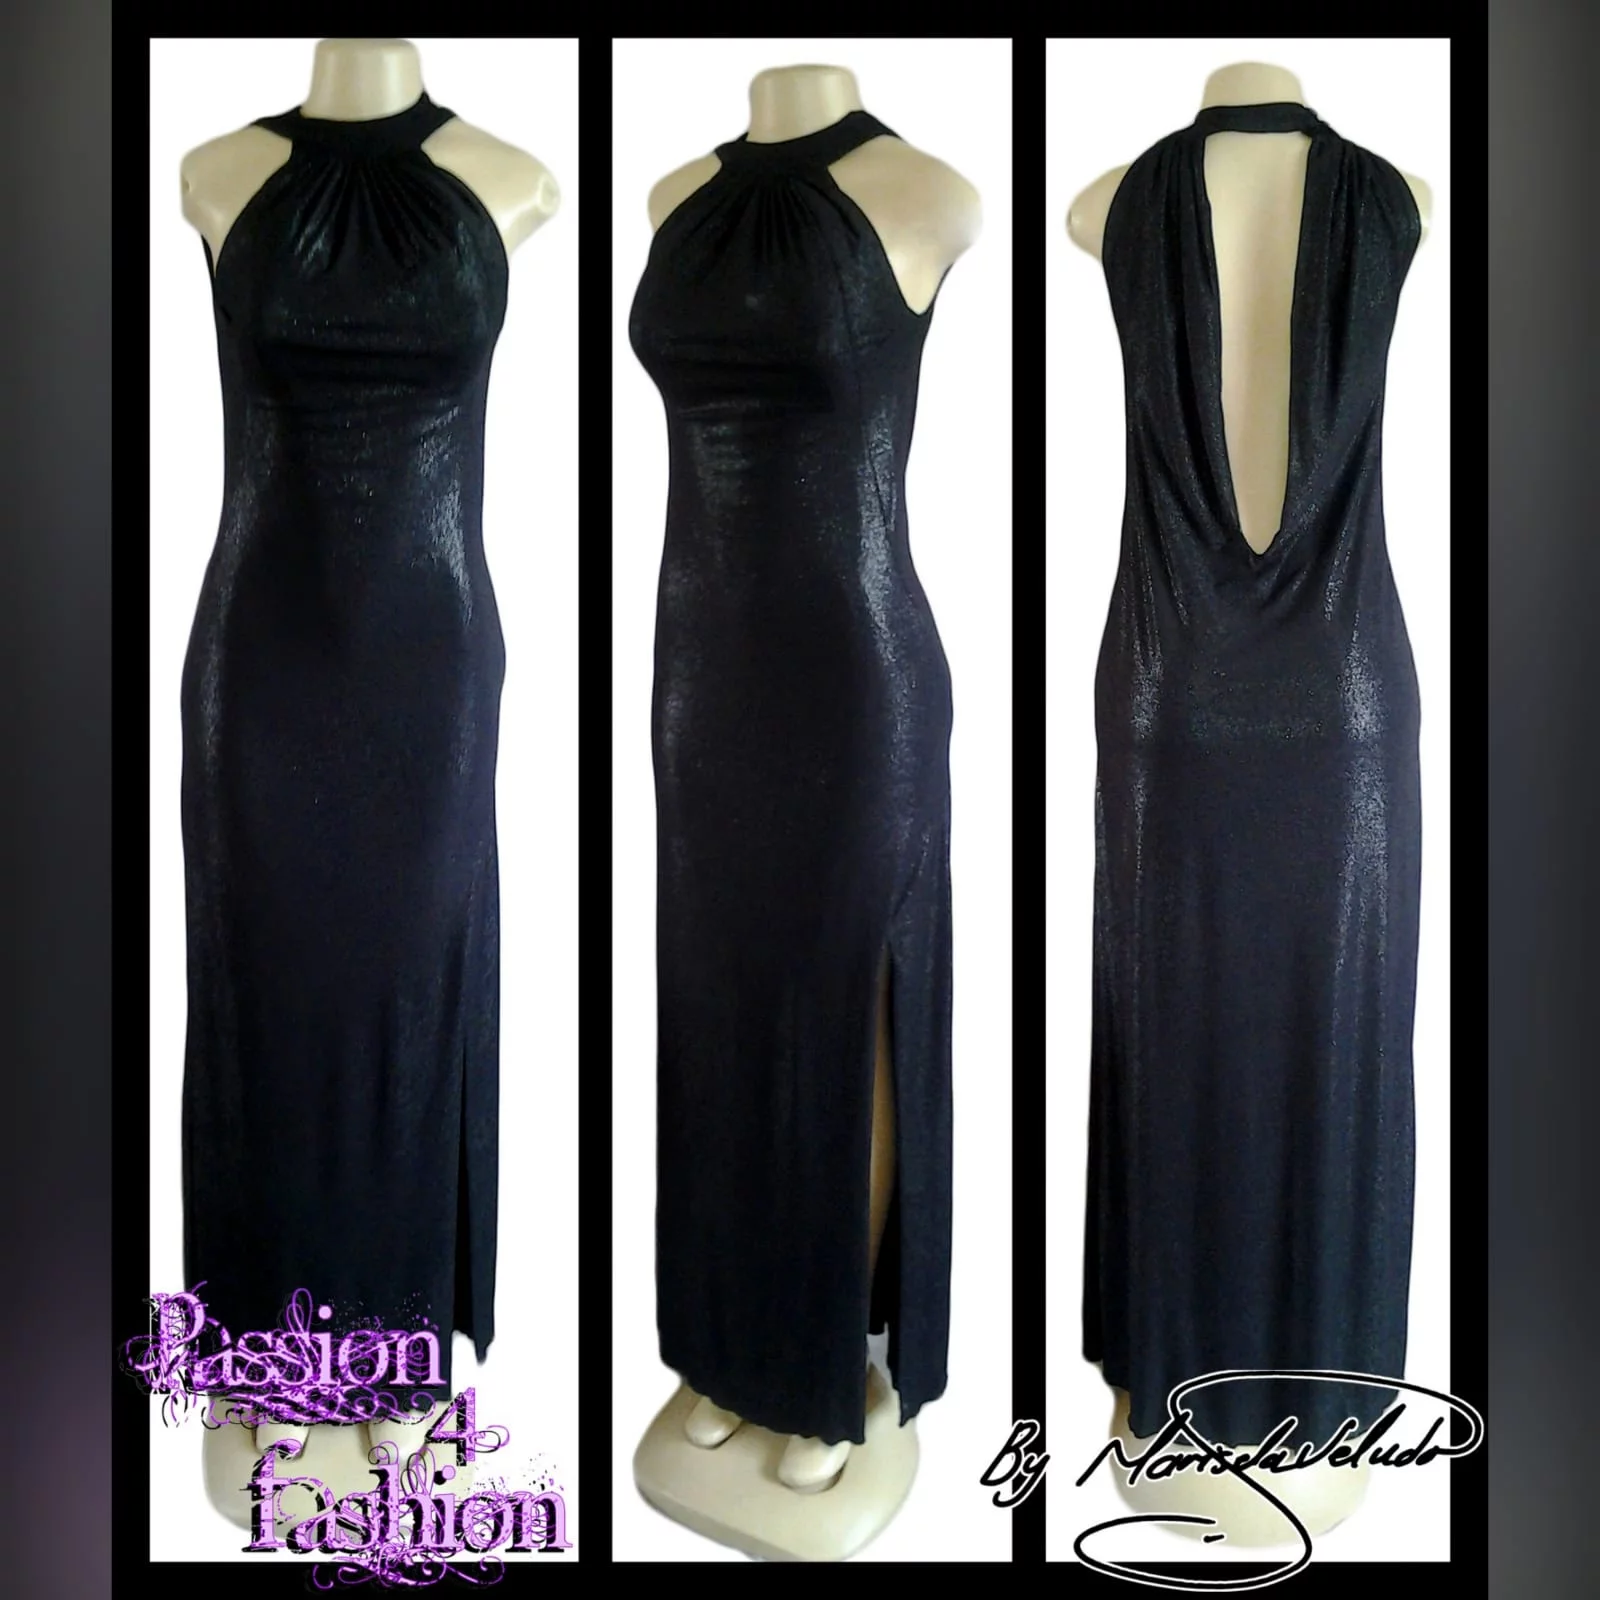 Black shimmer fitted long evening dress 3 black shimmer fitted long evening dress, with a gathered neckline and a low open cowl neck at the back, with a side slit.